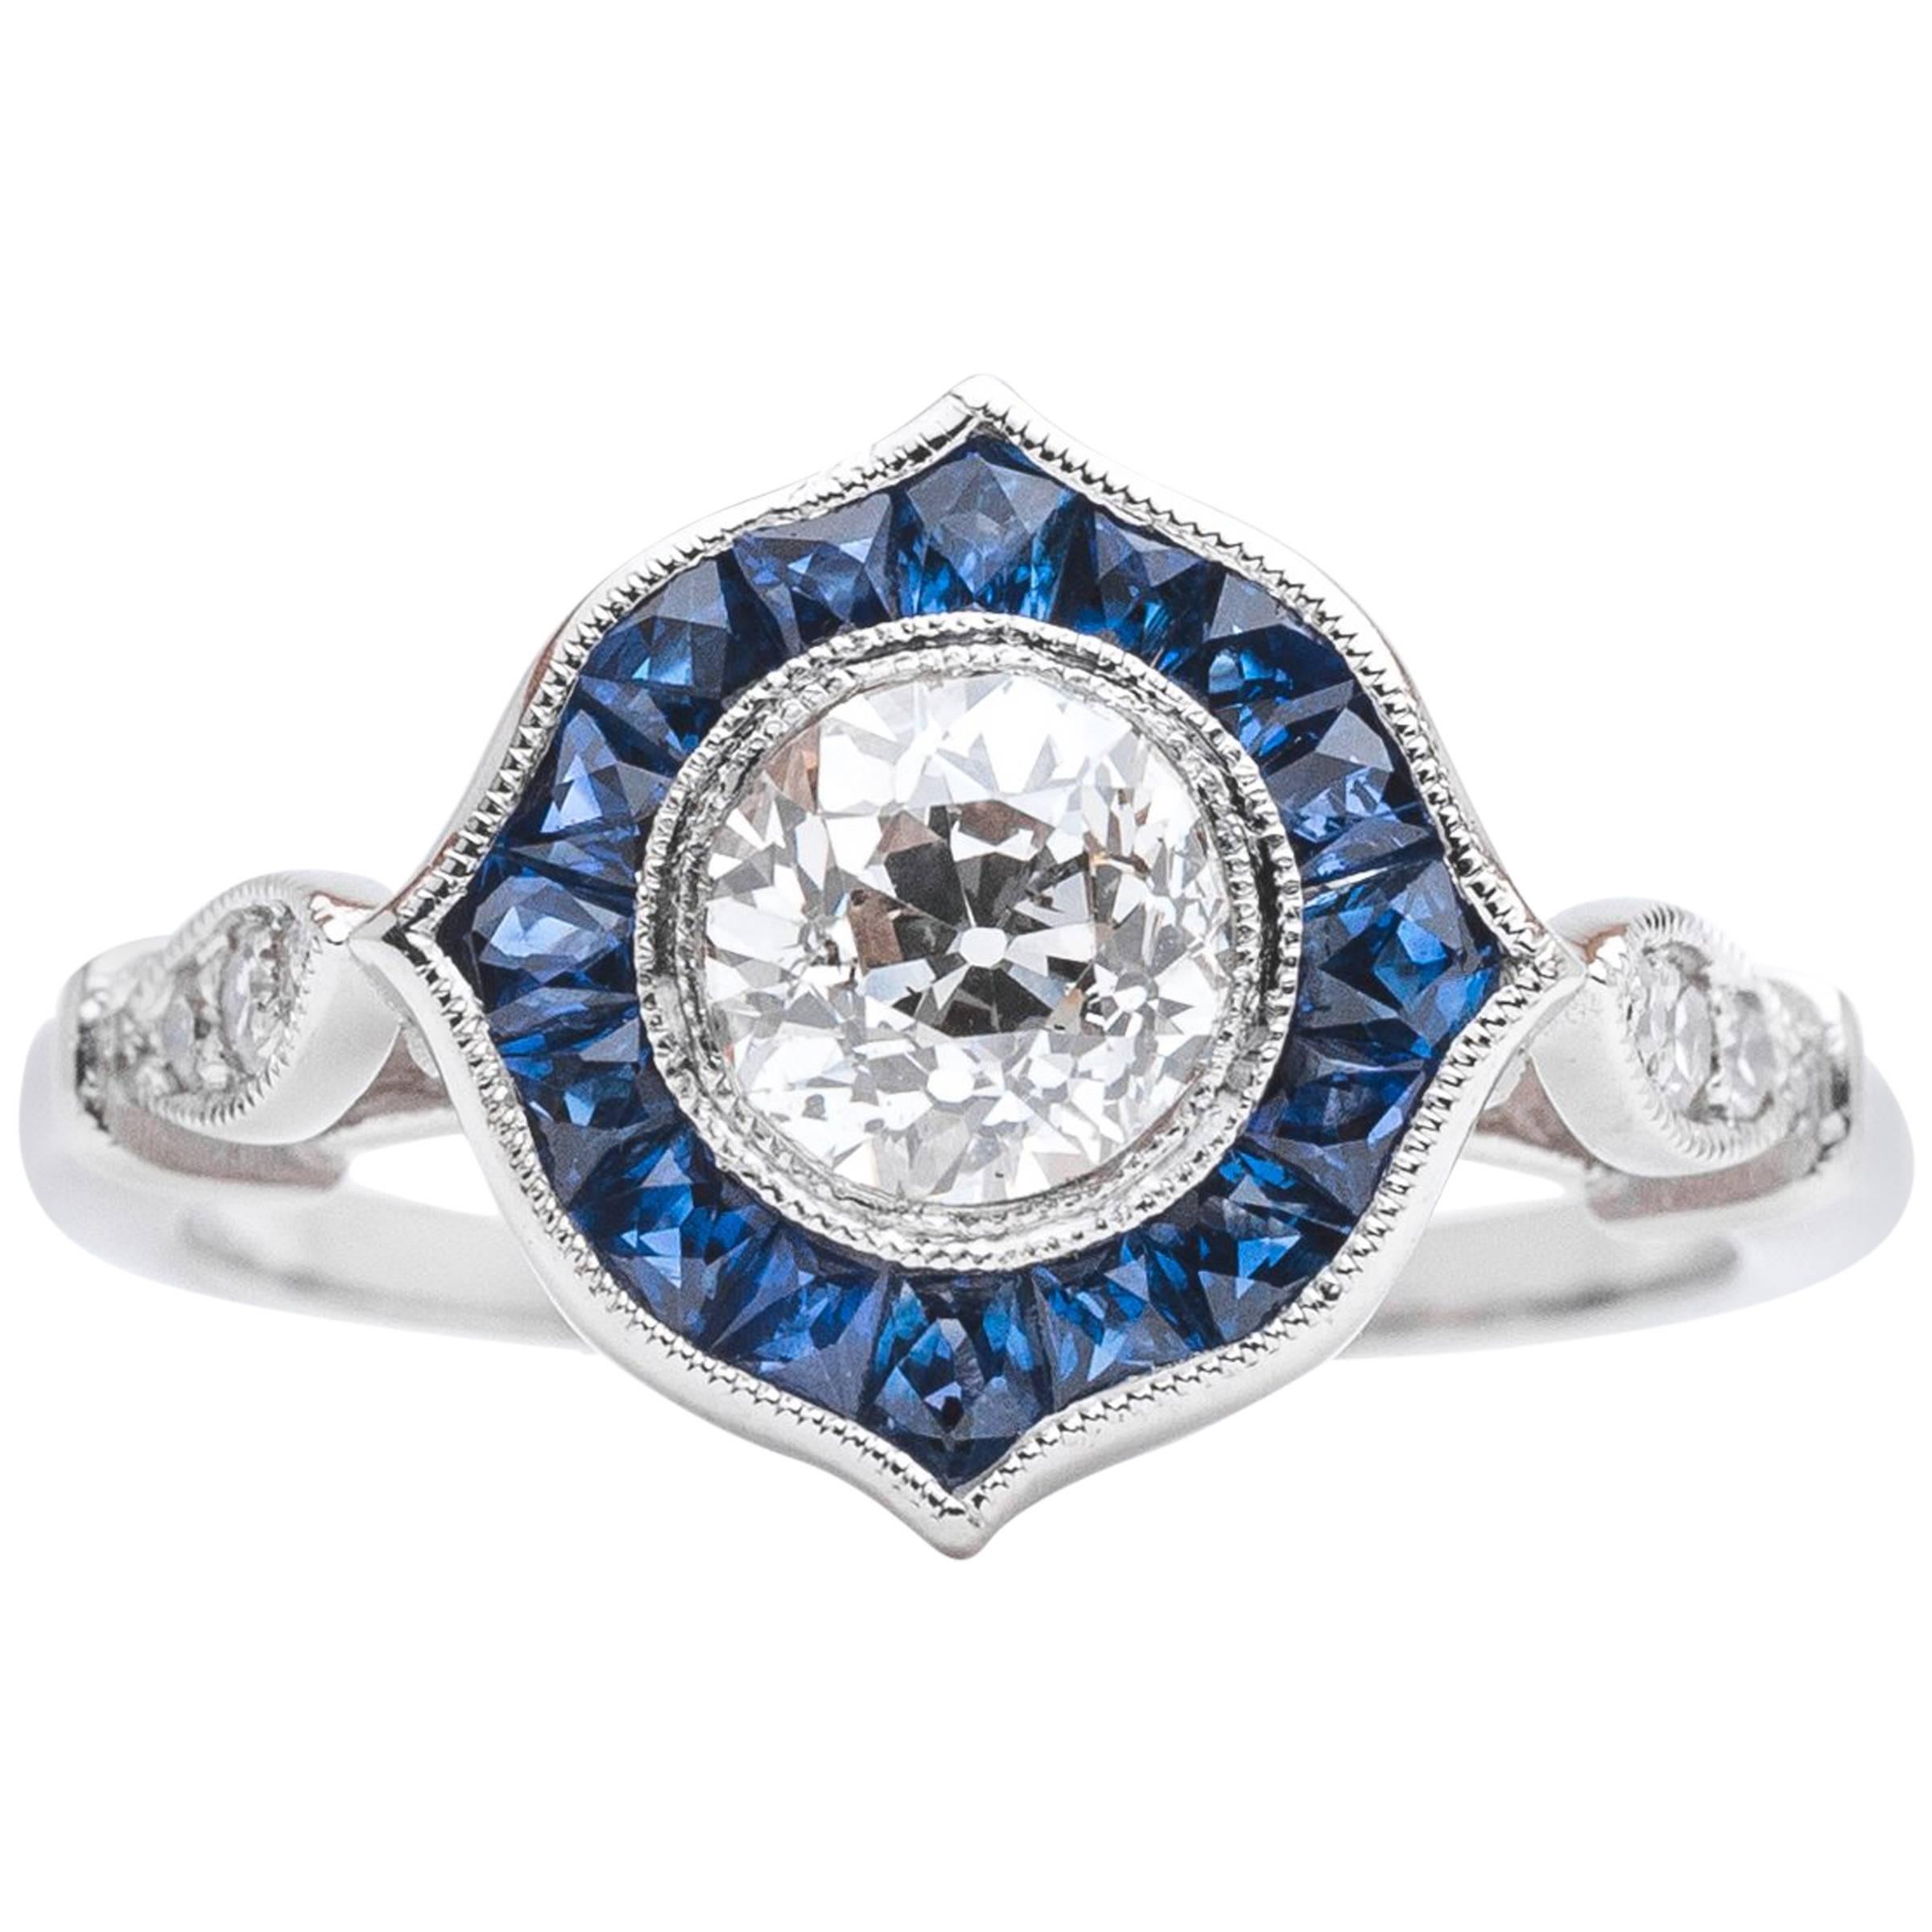 Sparkling 0.86 Carat Diamond and Sapphire Halo Ring in Platinum For Sale